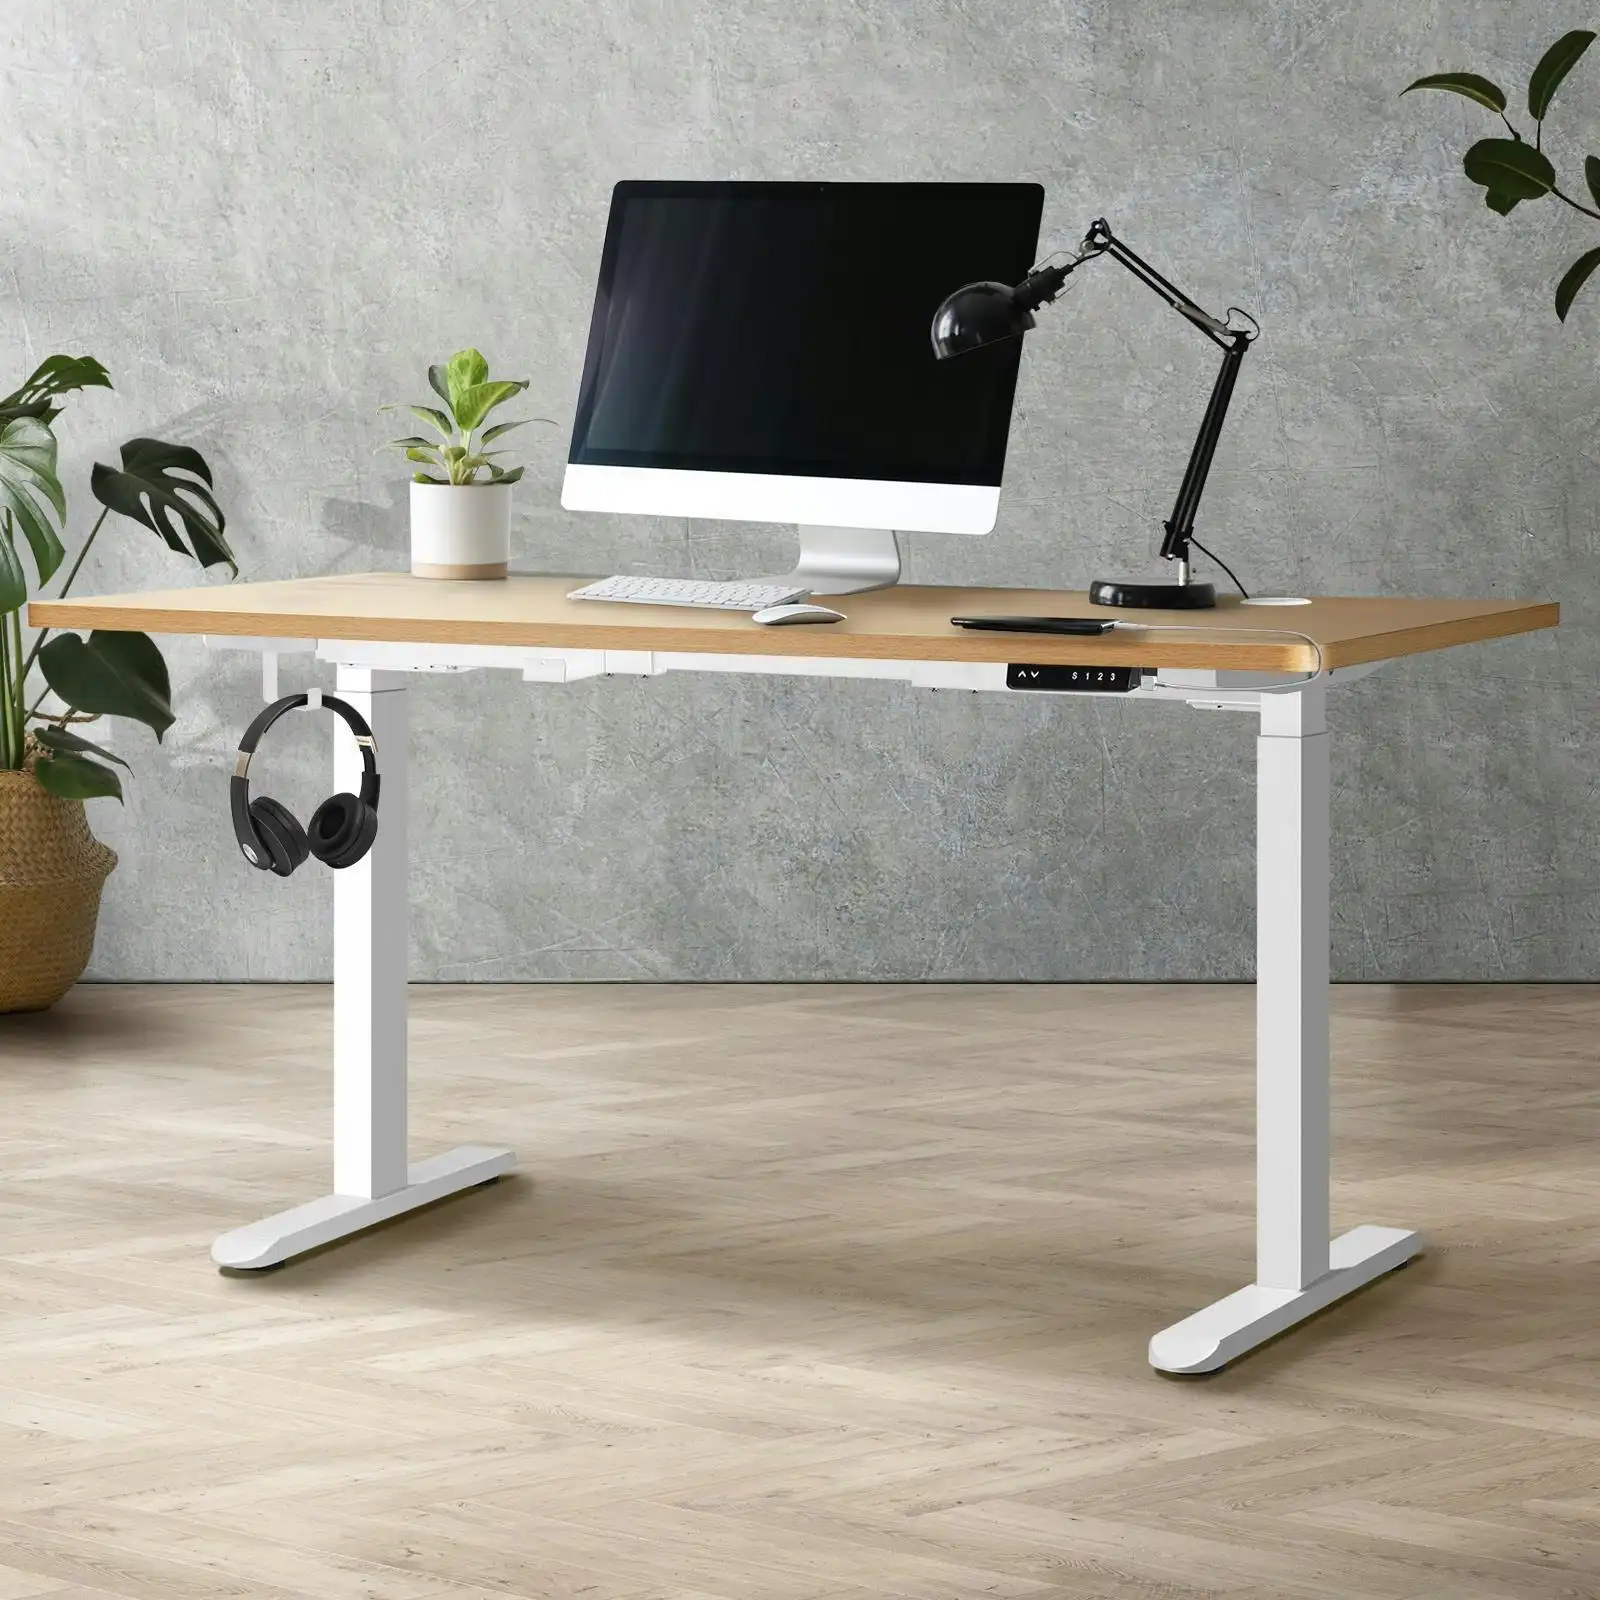 Oikiture 150cm Electric Standing Desk Dual Motor White Frame OAK Desktop With USB&Type C Port